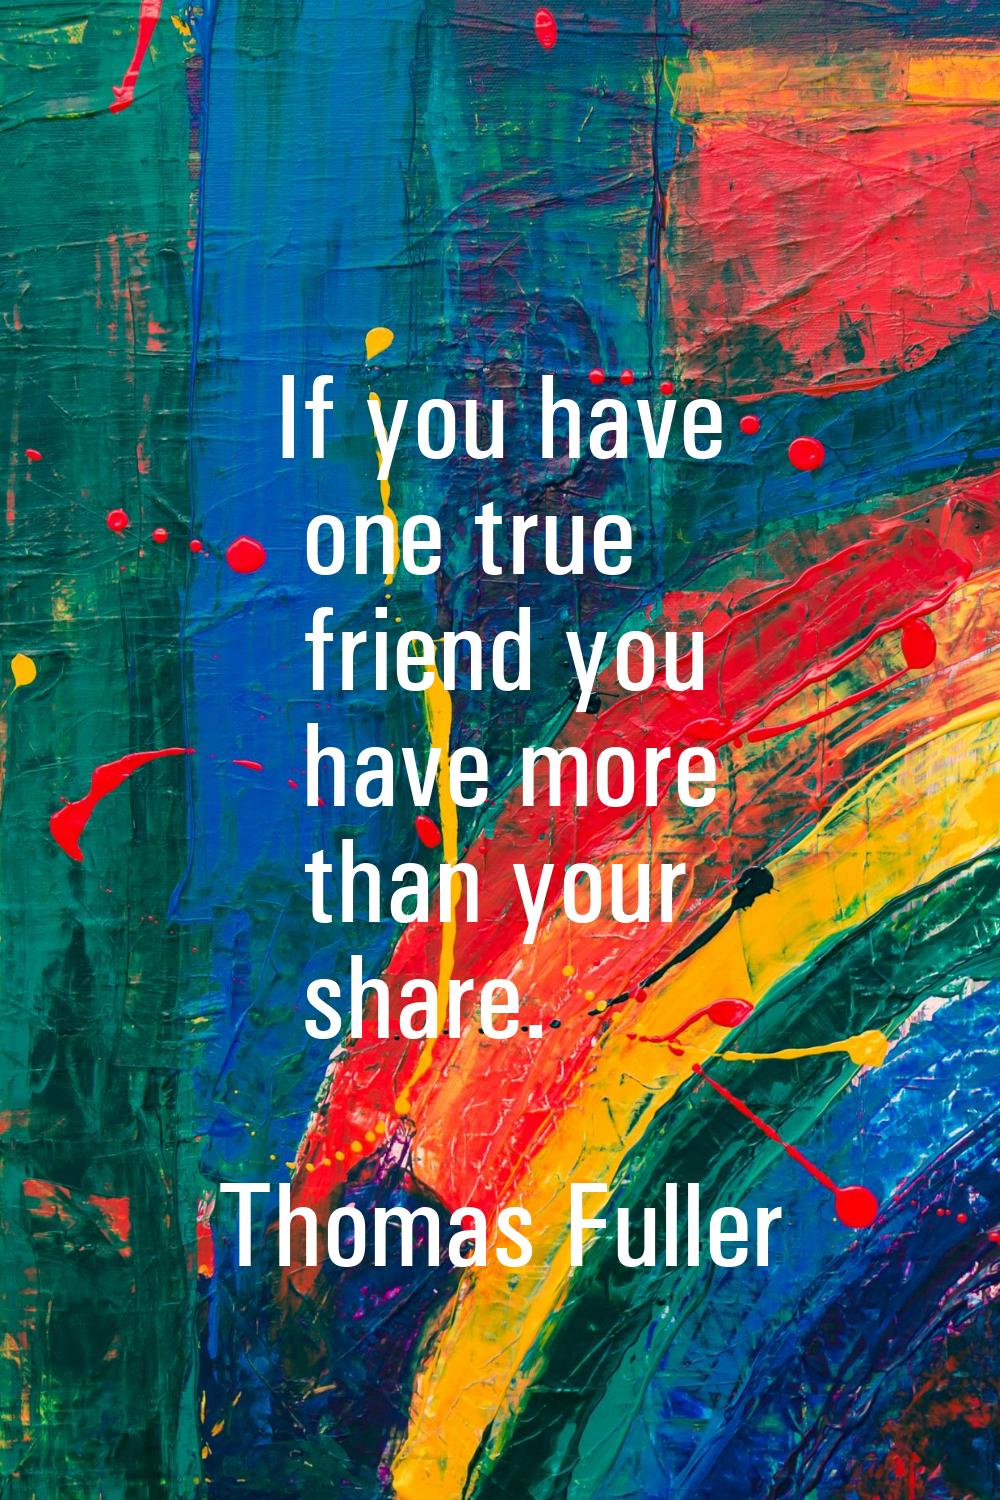 If you have one true friend you have more than your share.